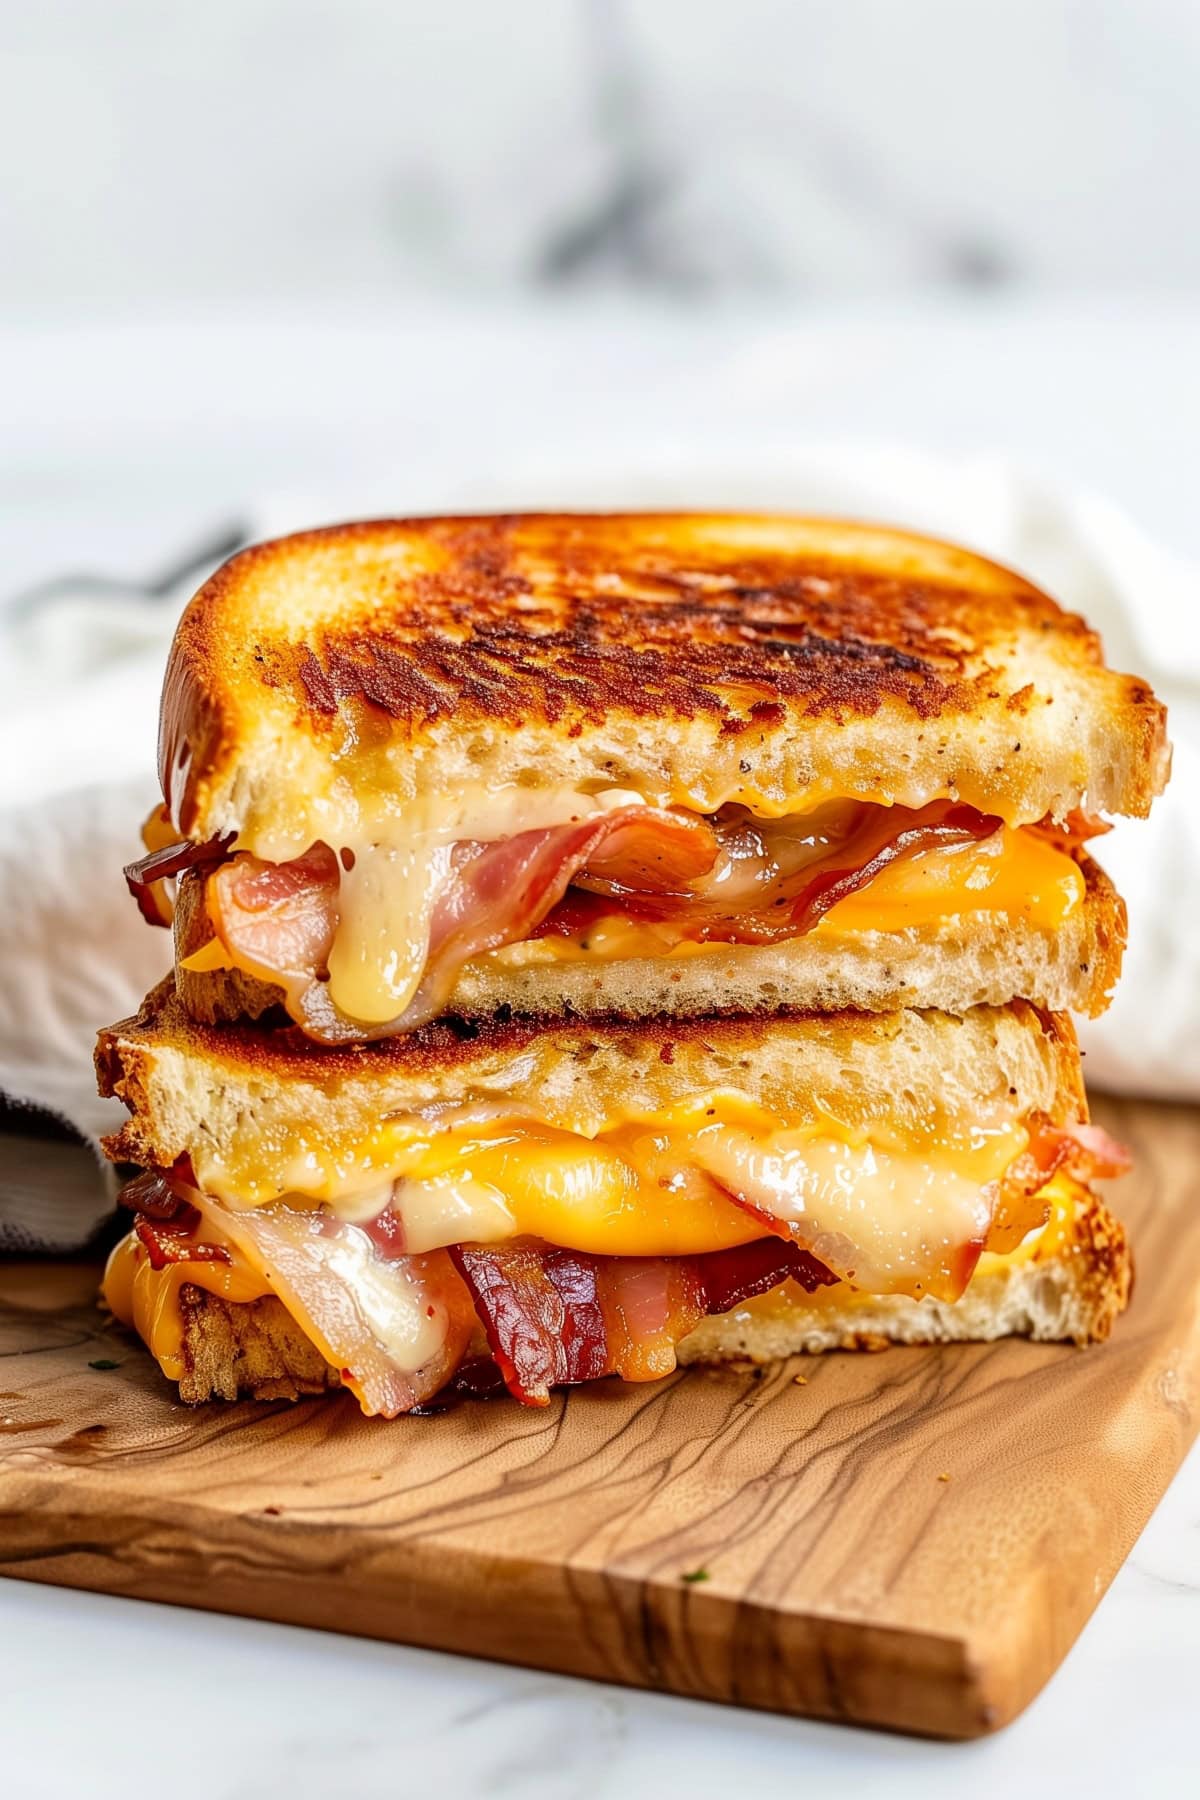 Cheesy bacon grilled cheese sandwich loaded with cripsy bacon and gooey melted cheese